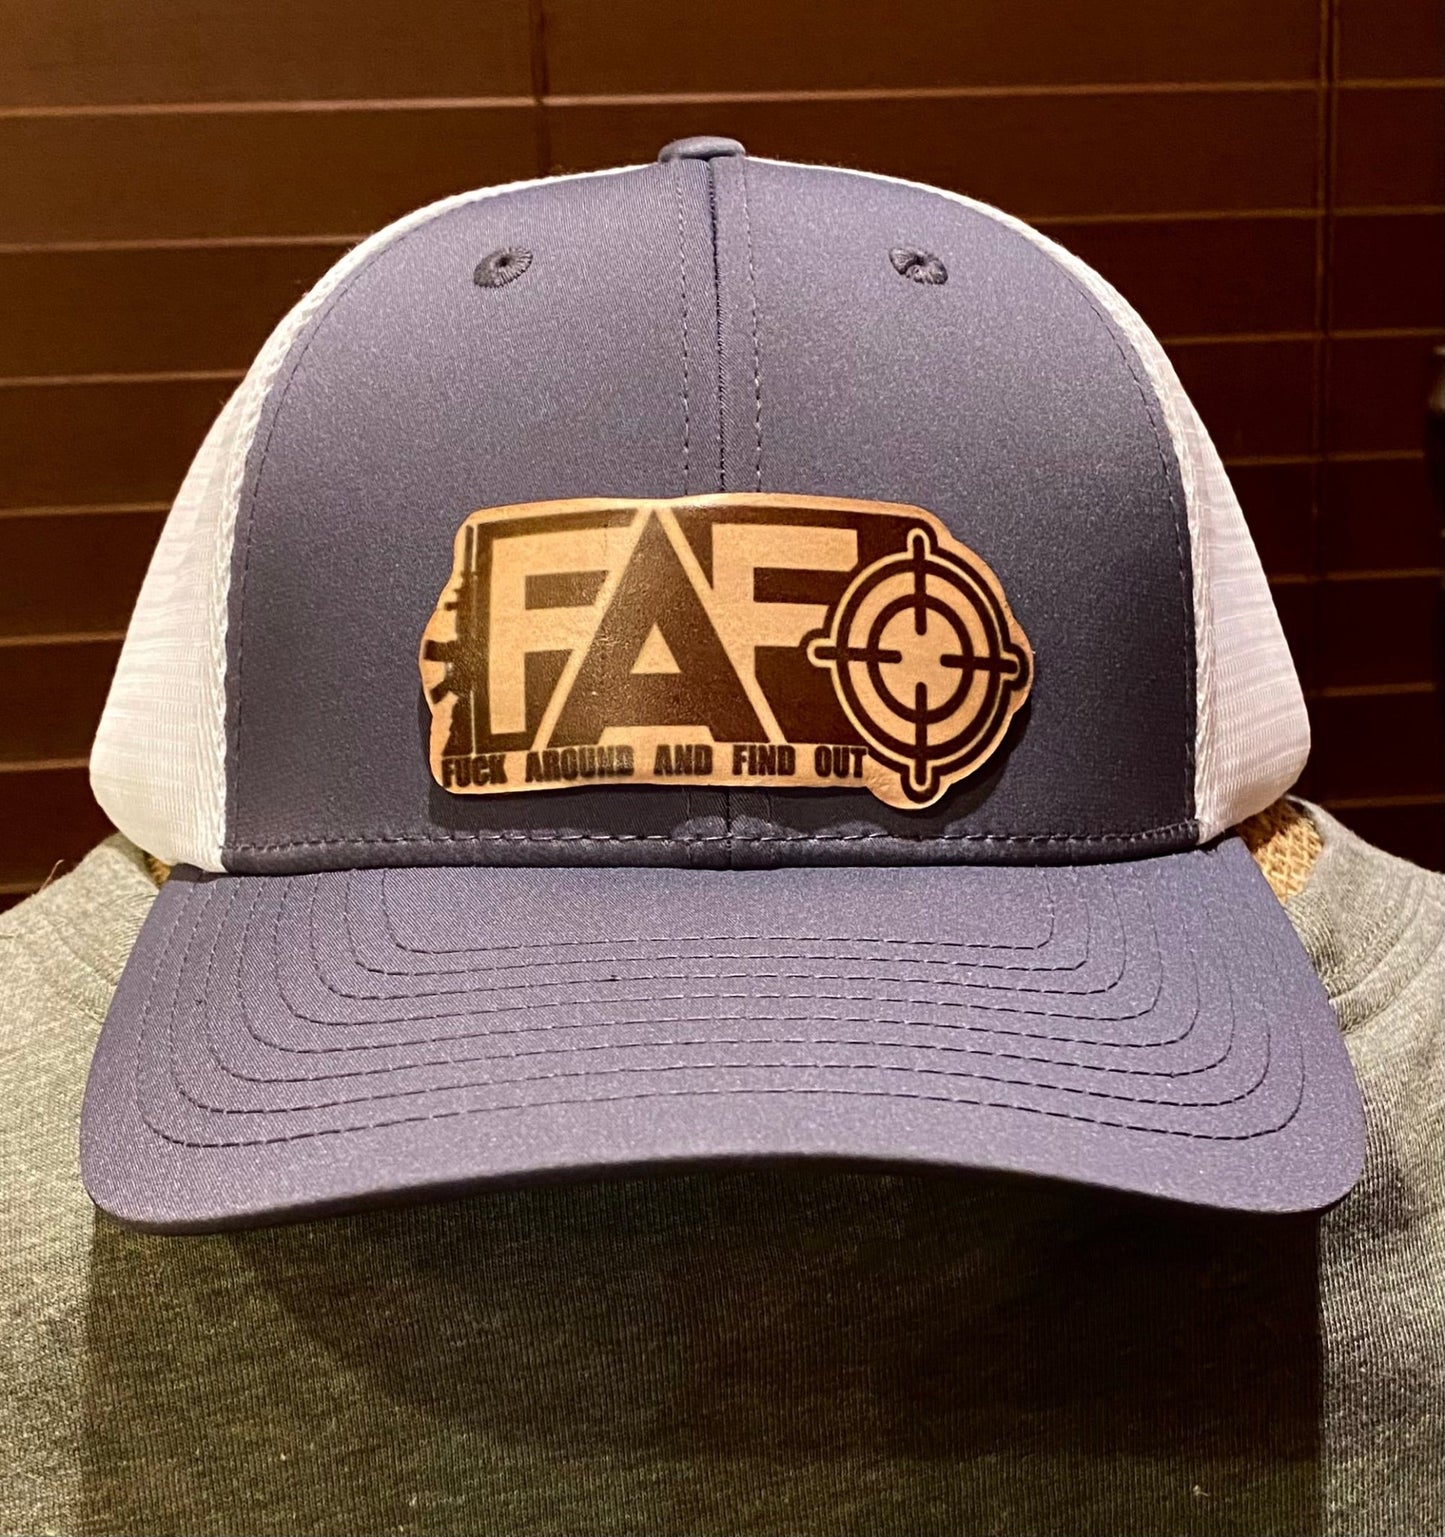 FAFO - CountryFide Custom Accessories and Outdoors